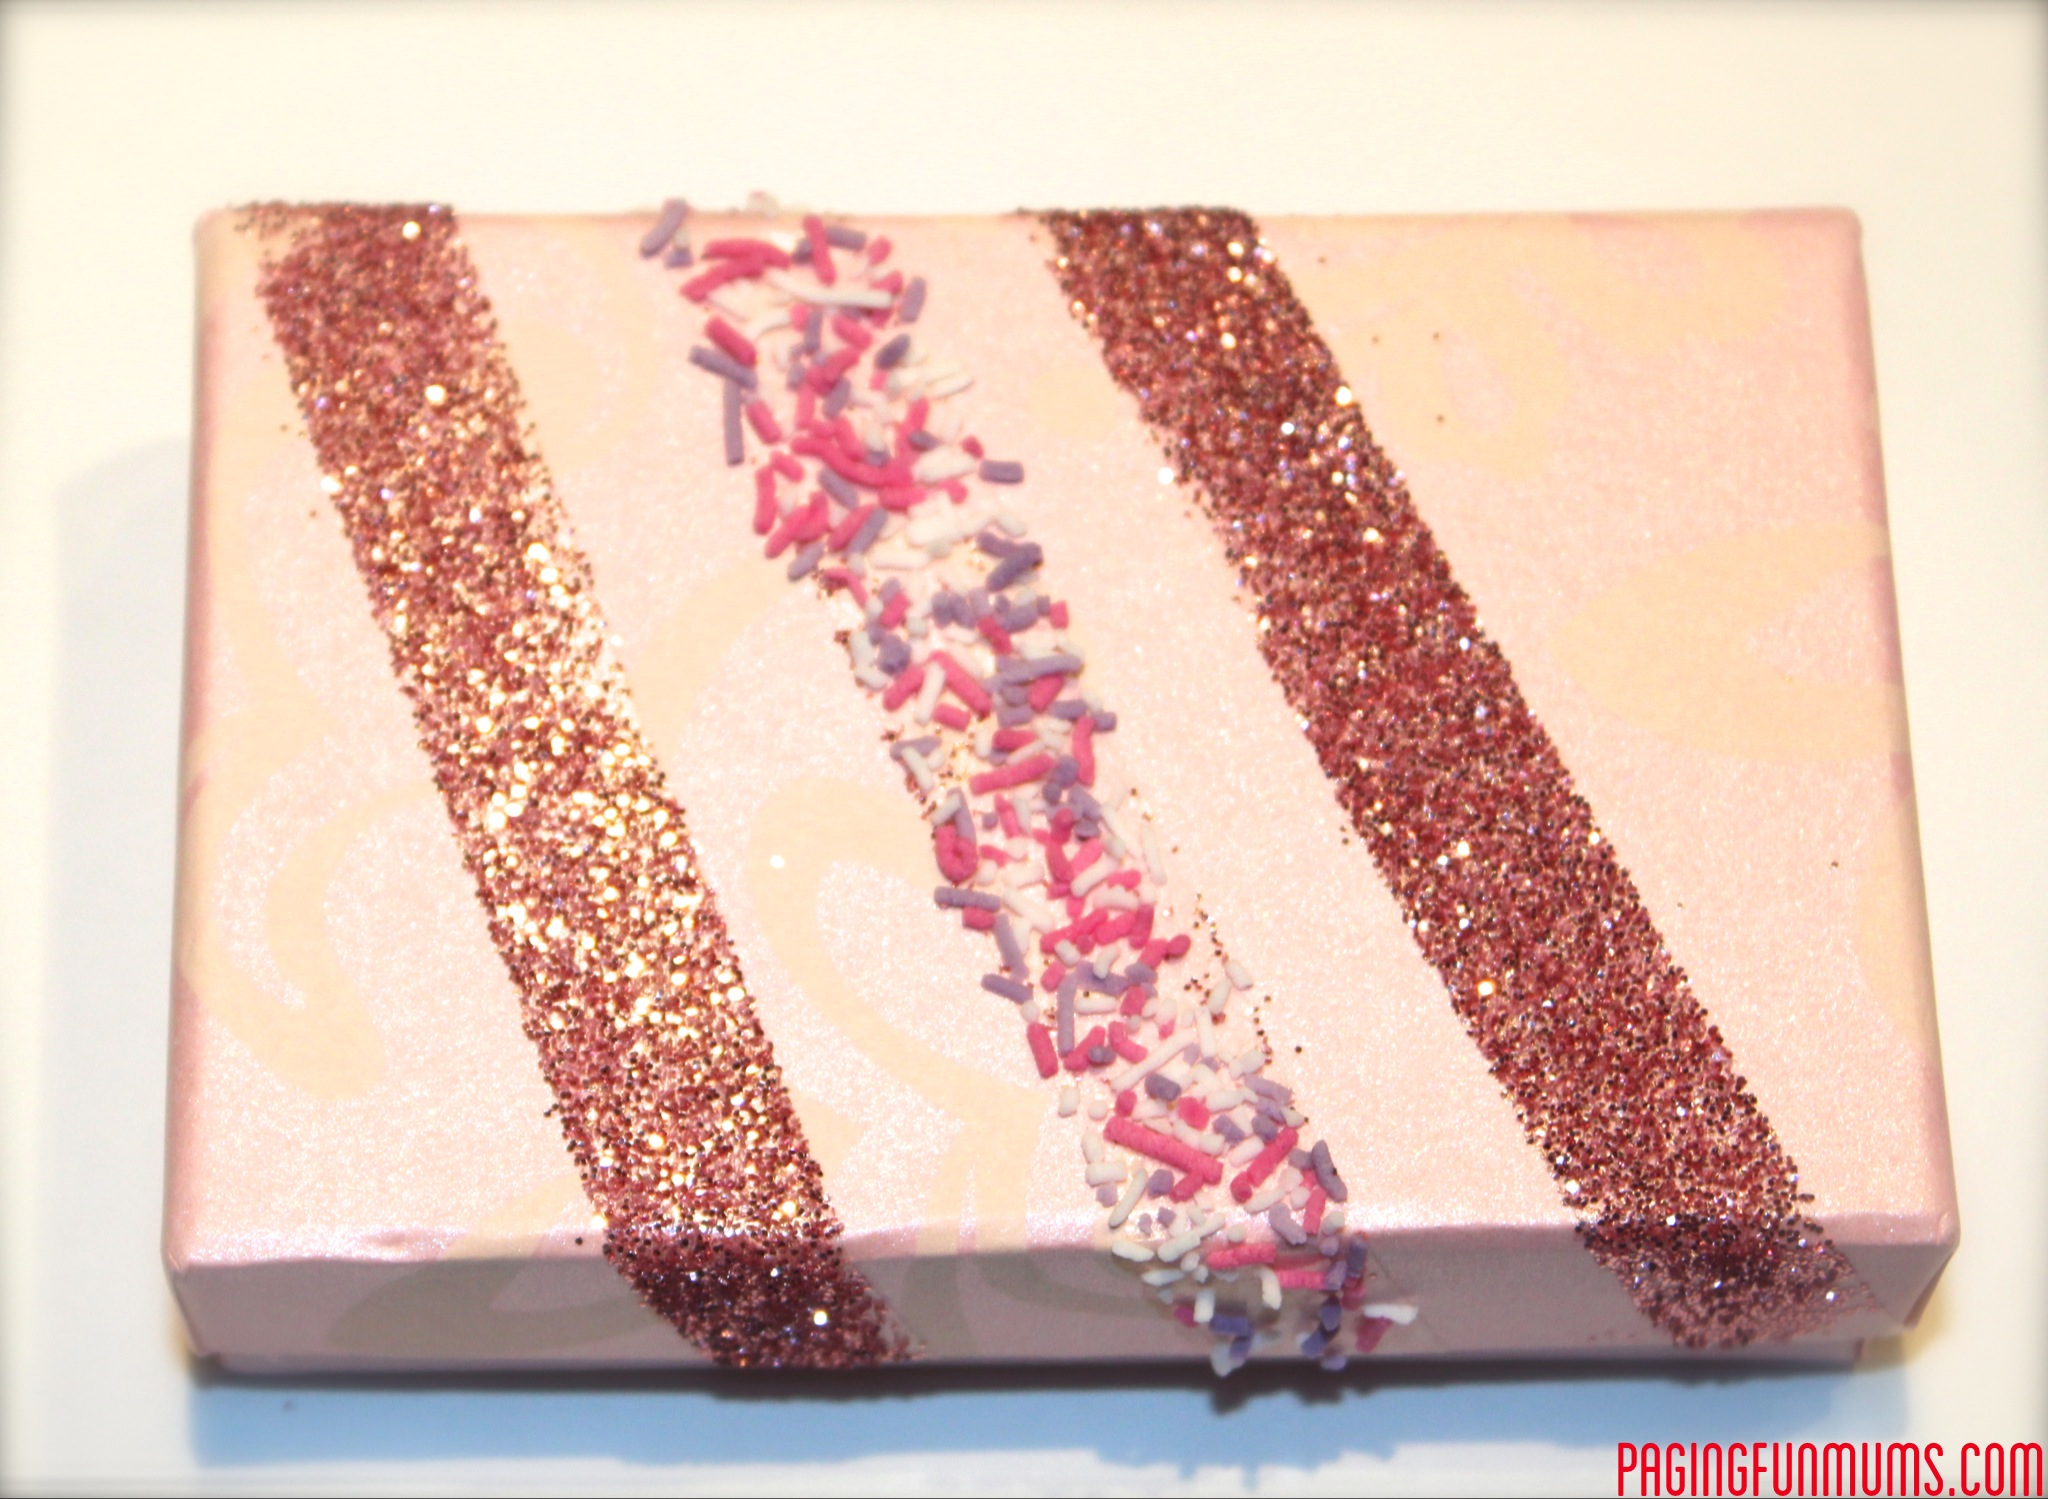 Glitter & Sprinkles + Double Sided Tape = Fun Gift Wrapping Idea! - Jenni -  Paging Fun Mums